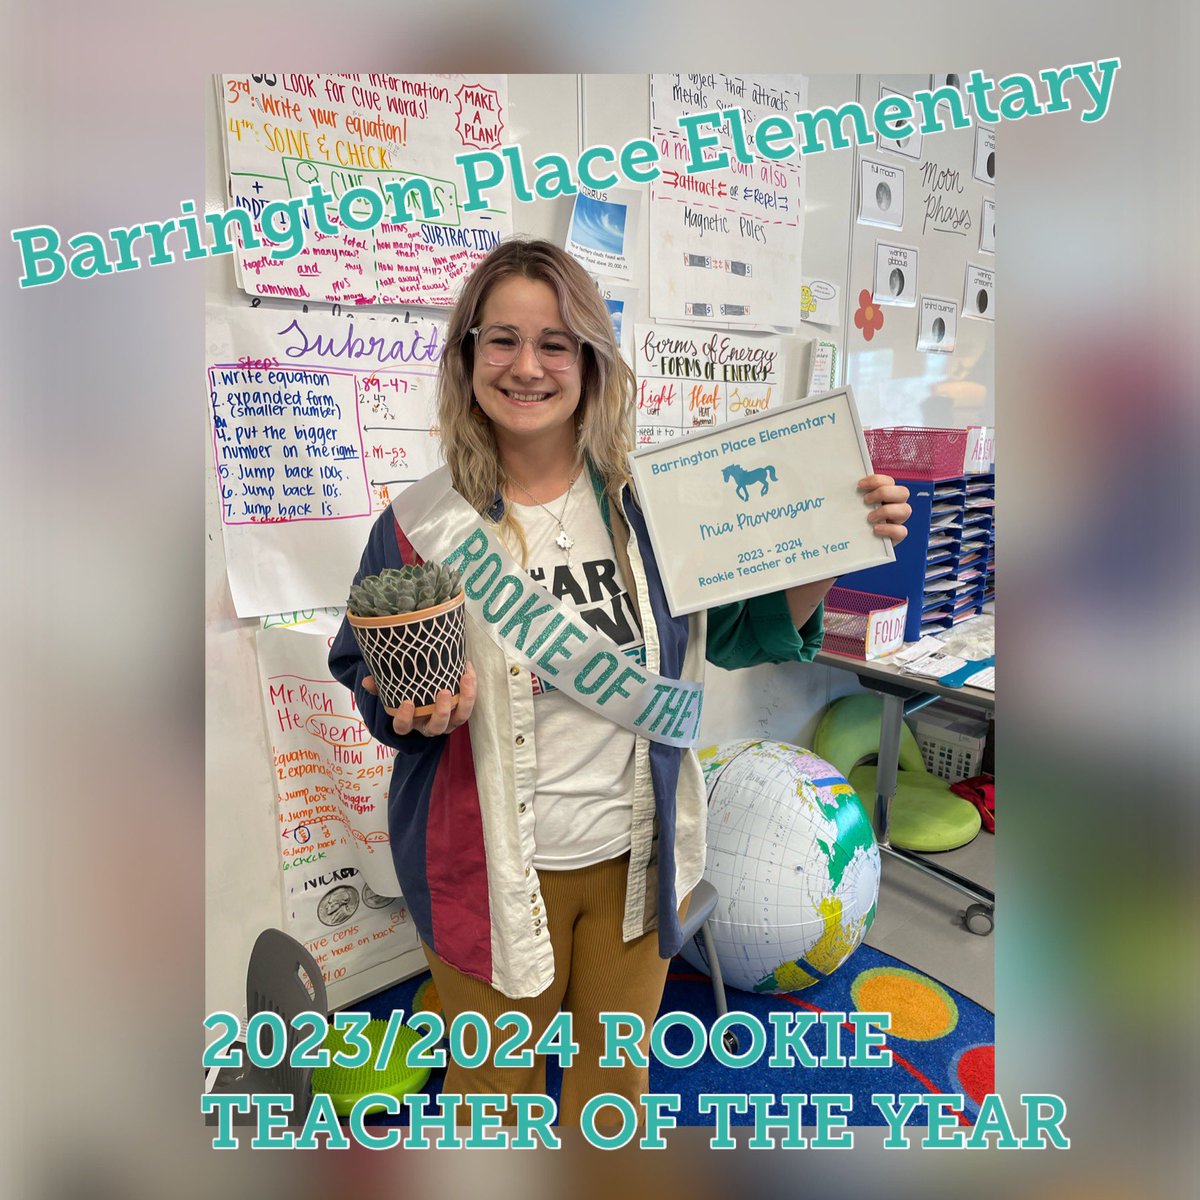 Mrs. Provenzano is making us proud as Barrington Place 2023/2024 Rookie Teacher of the Year!! @FortBendISD